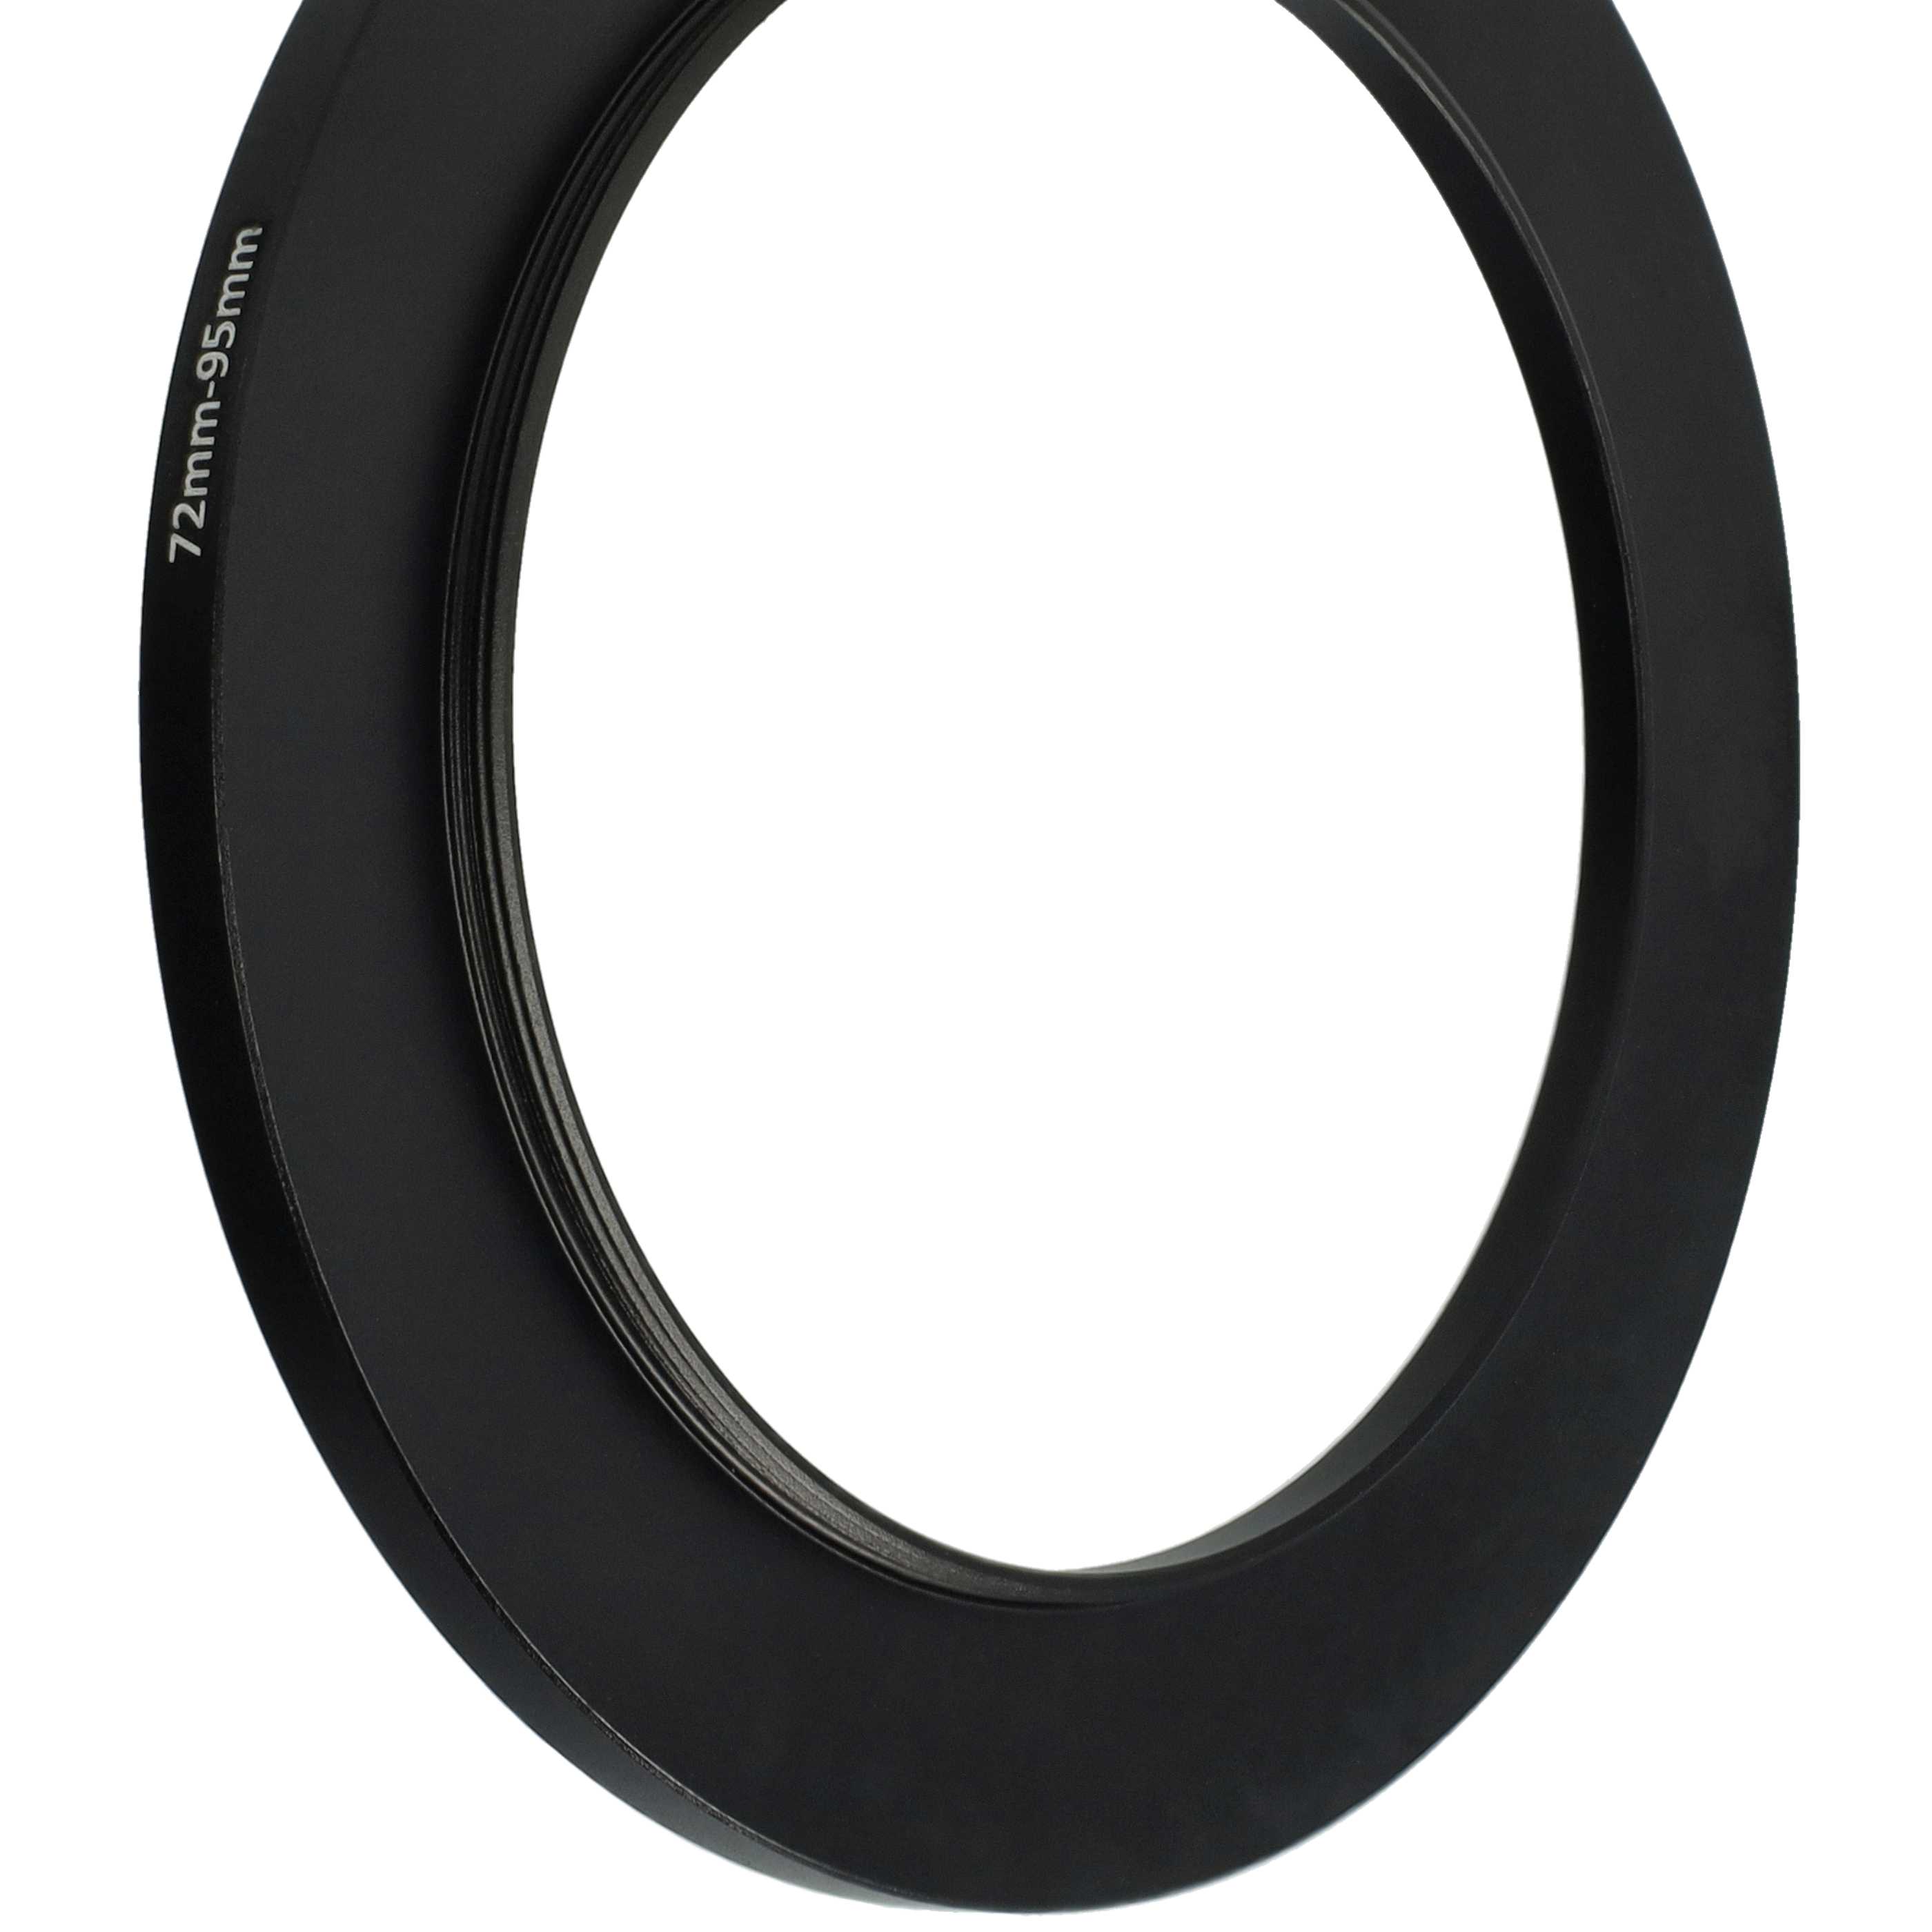 Step-Up Ring Adapter of 72 mm to 95 mmfor various Camera Lens - Filter Adapter